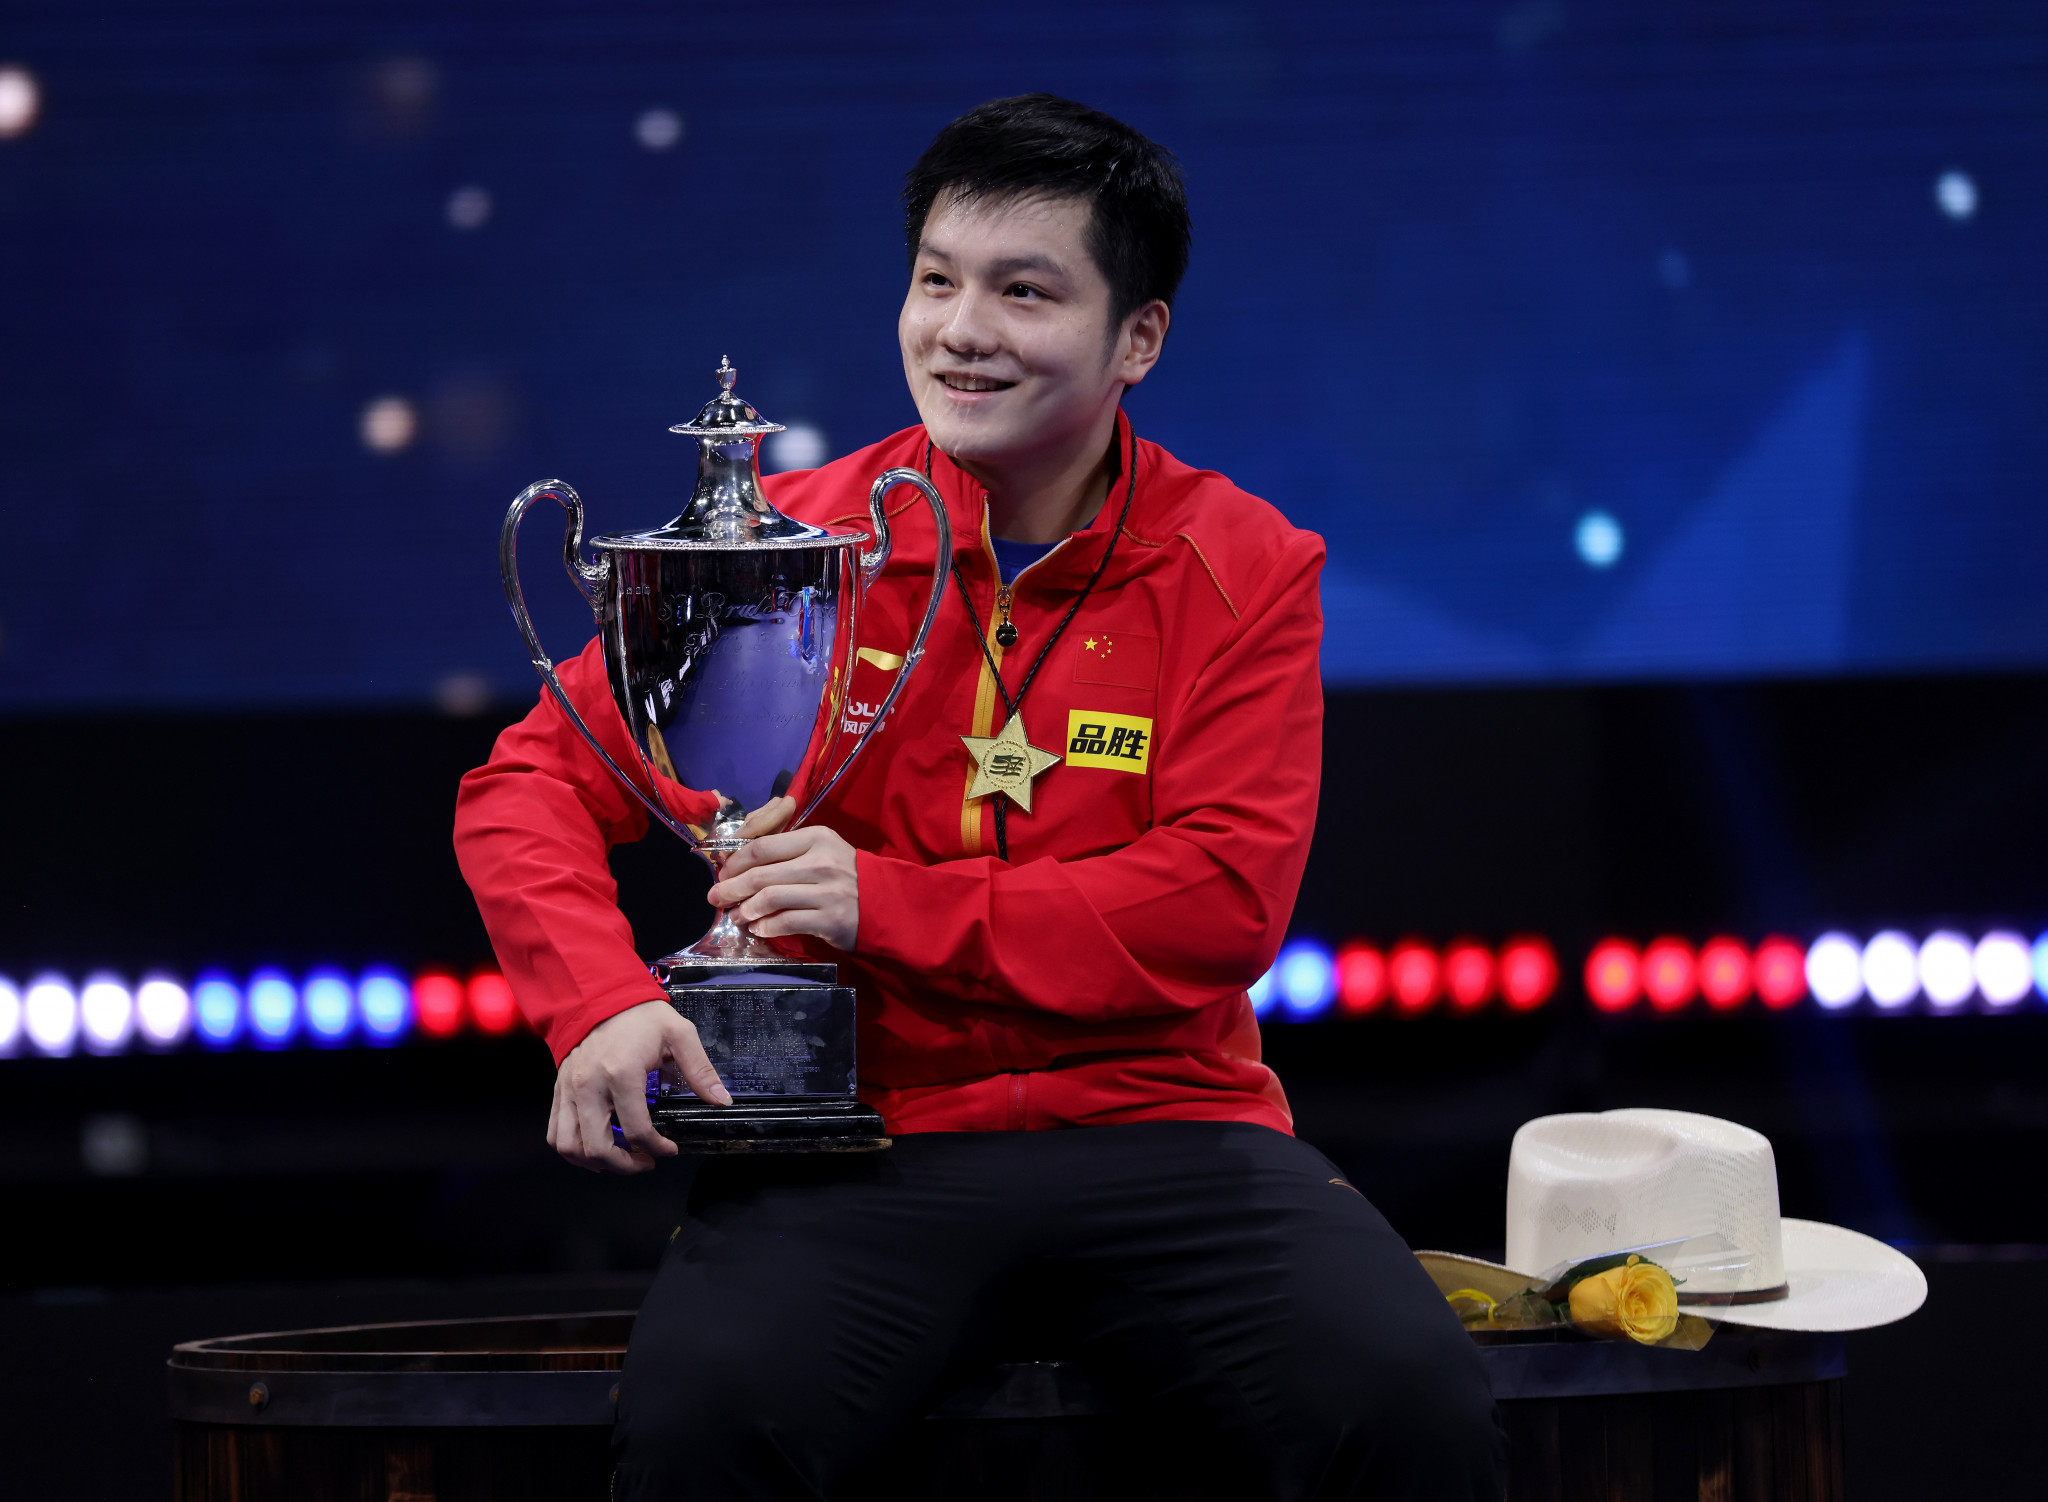 Fan Zhendong claimed the world title in Houston last month and will be aiming for similar success in Singapore ©Getty Images